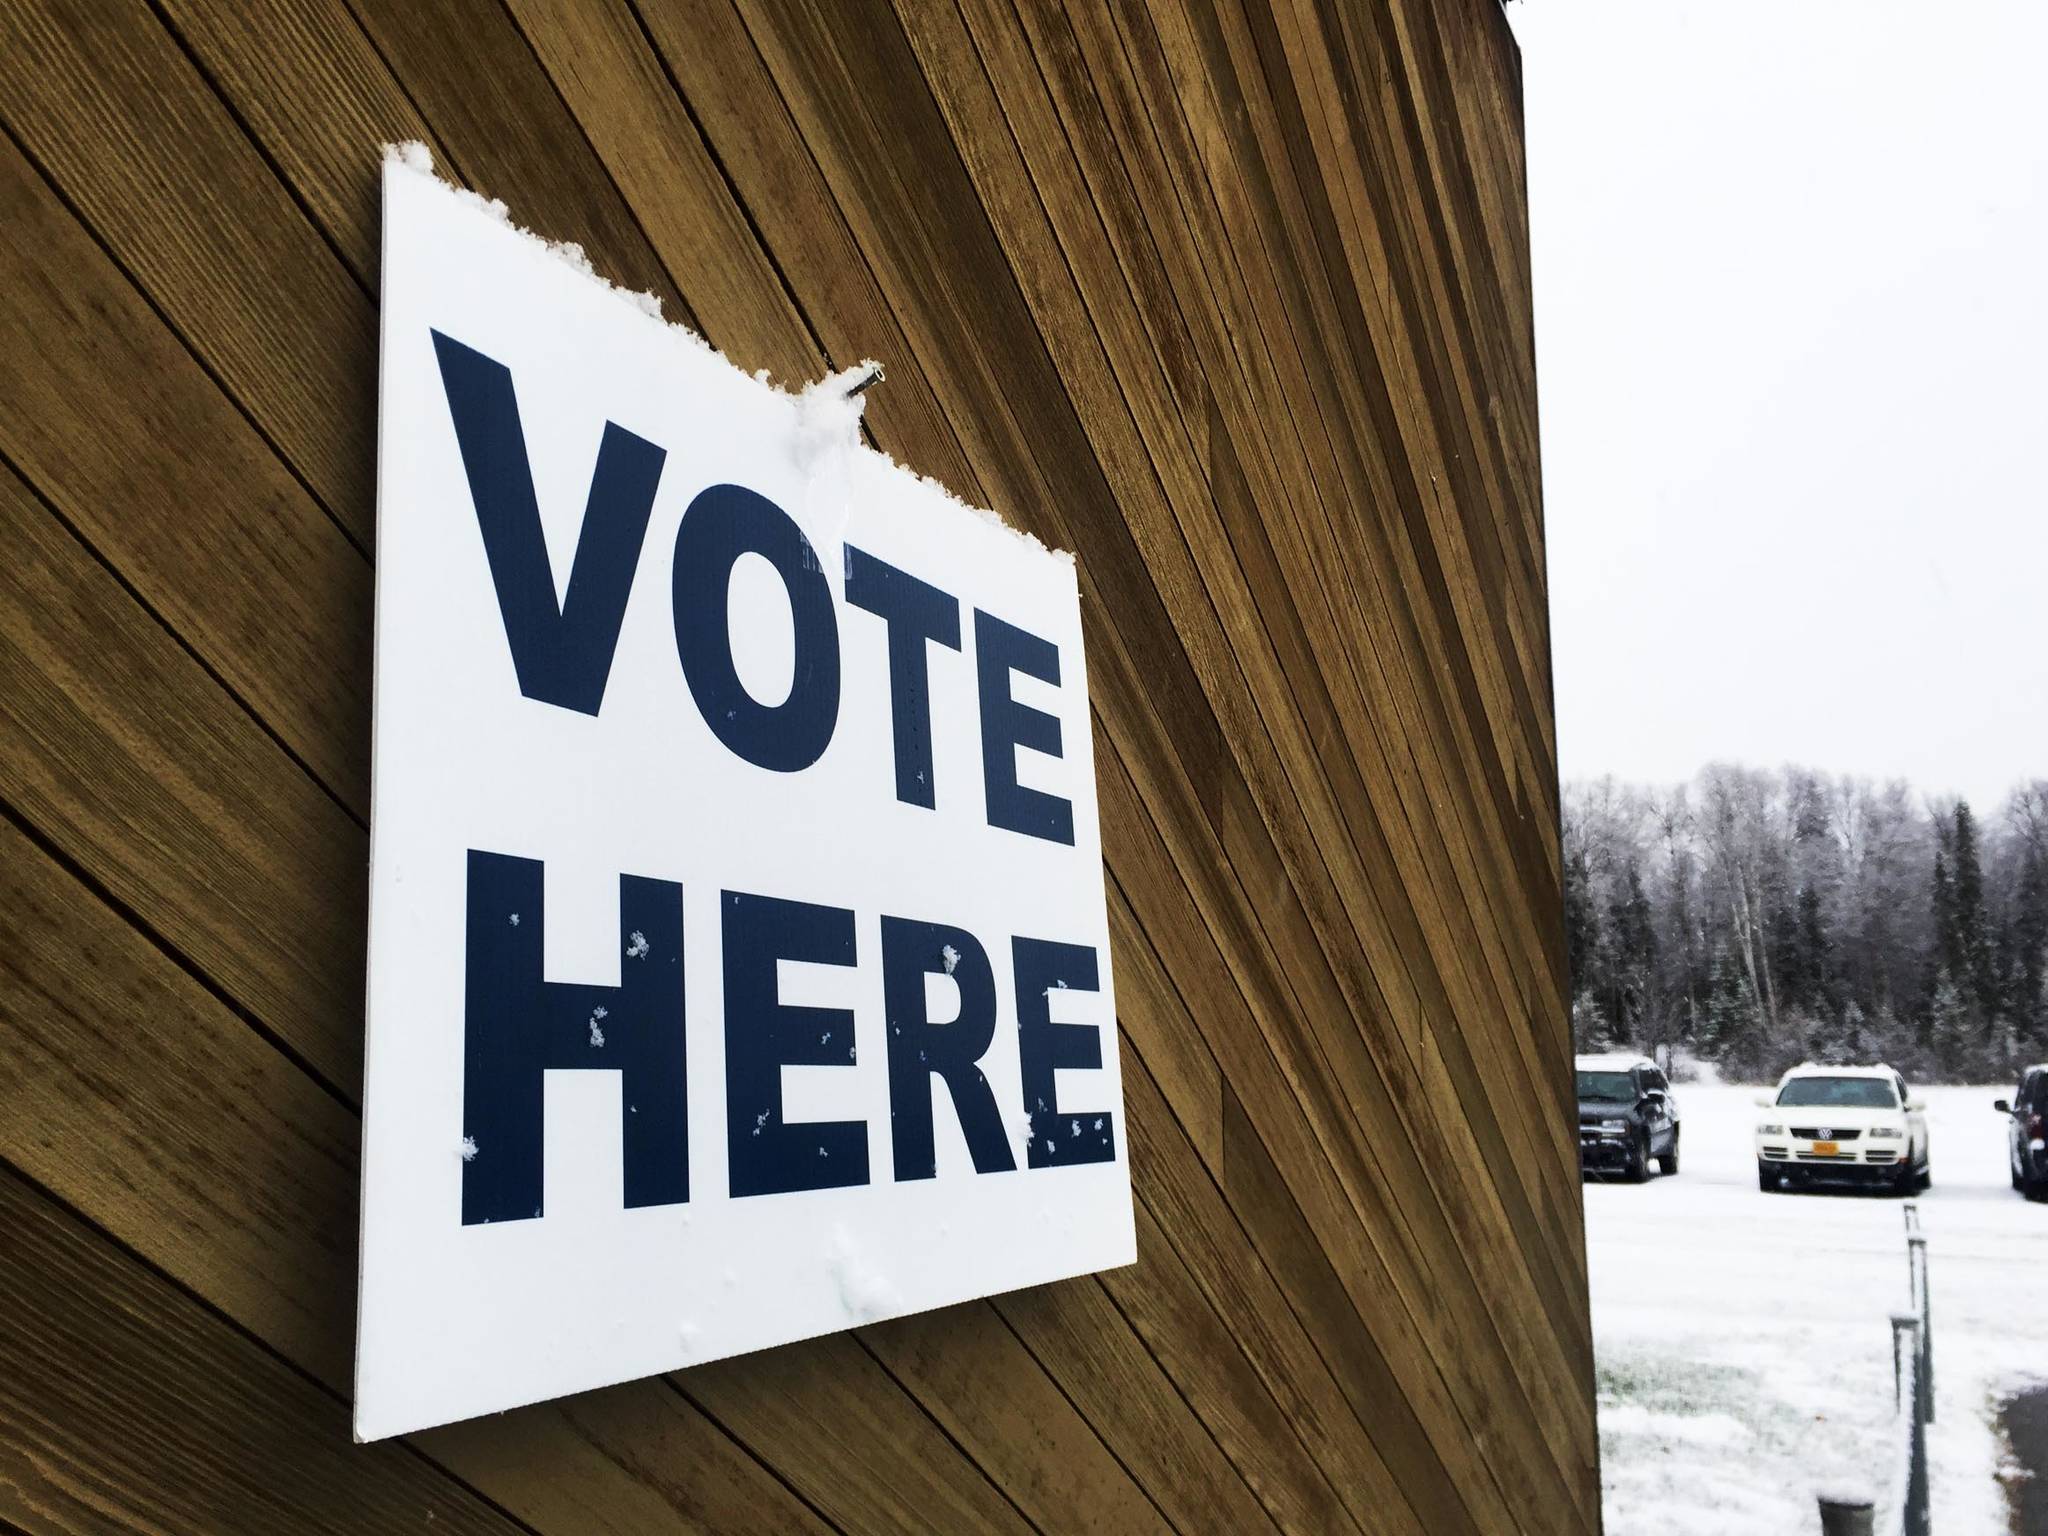 Snow clings to a sign marking a polling place at the Soldotna Regional Sports Complex on Tuesday, Oct. 24, 2017 in Soldotna, Alaska. Kenai Peninsula voters chose between borough mayoral candidates Linda Hutchings and Charlie Pierce in the Tuesday runoff election. (Photo by Elizabeth Earl/Peninsula Clarion)